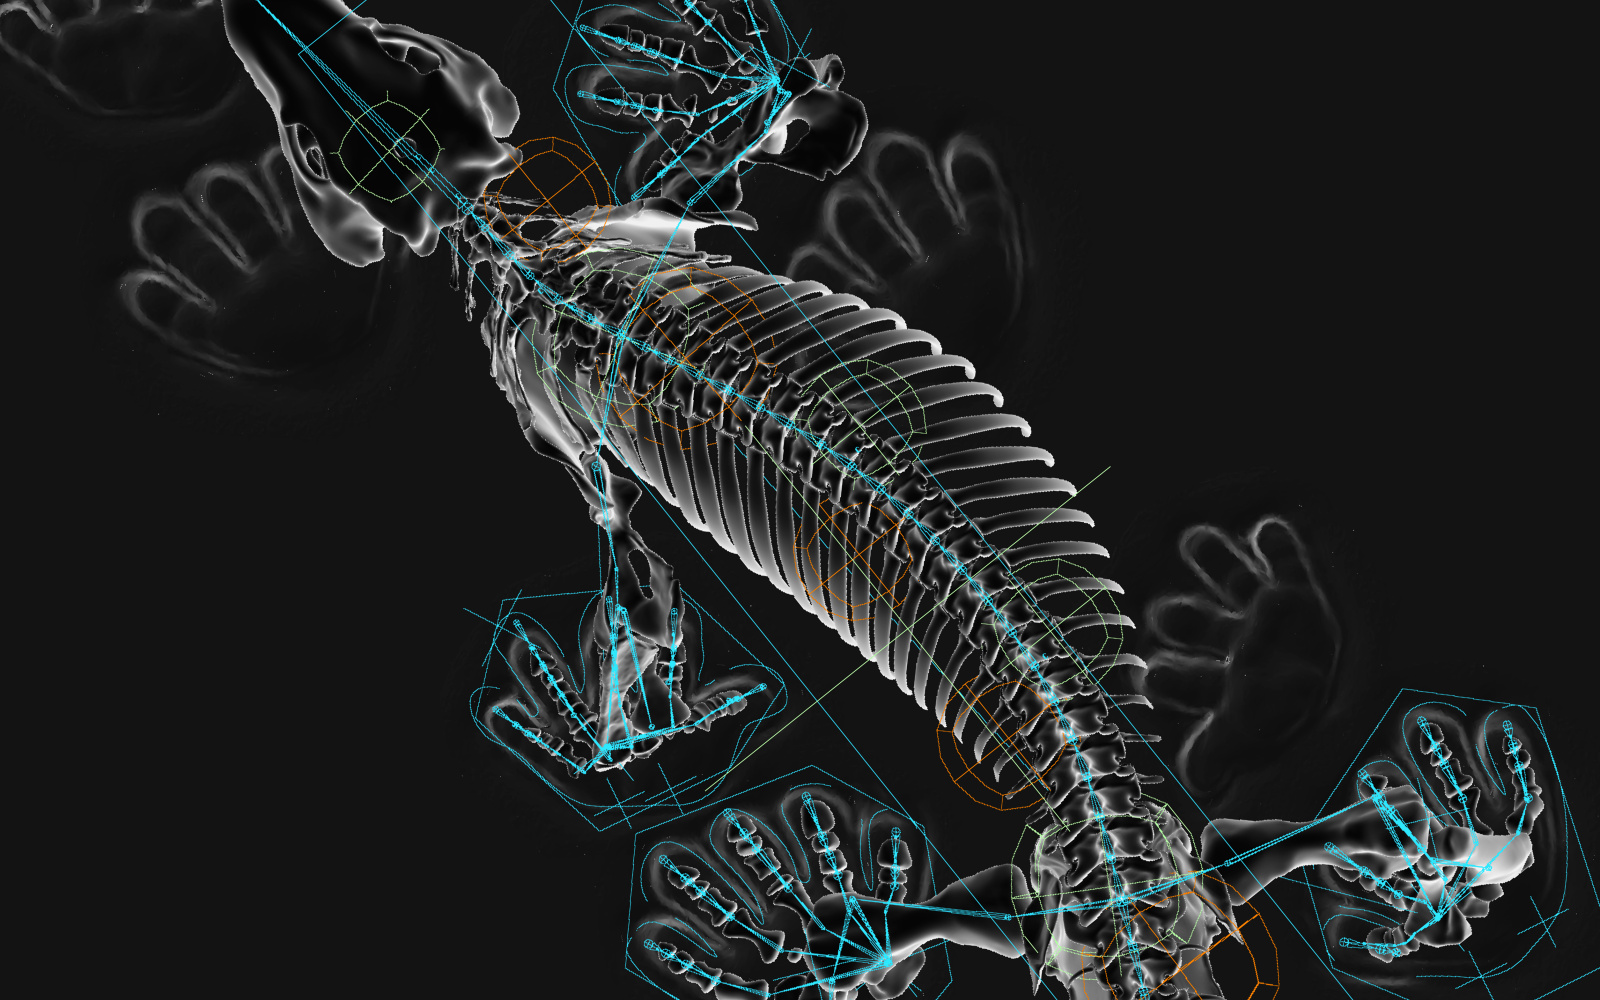 The digitally illustrated skeleton of a reptilian animal can be seen on a black background.